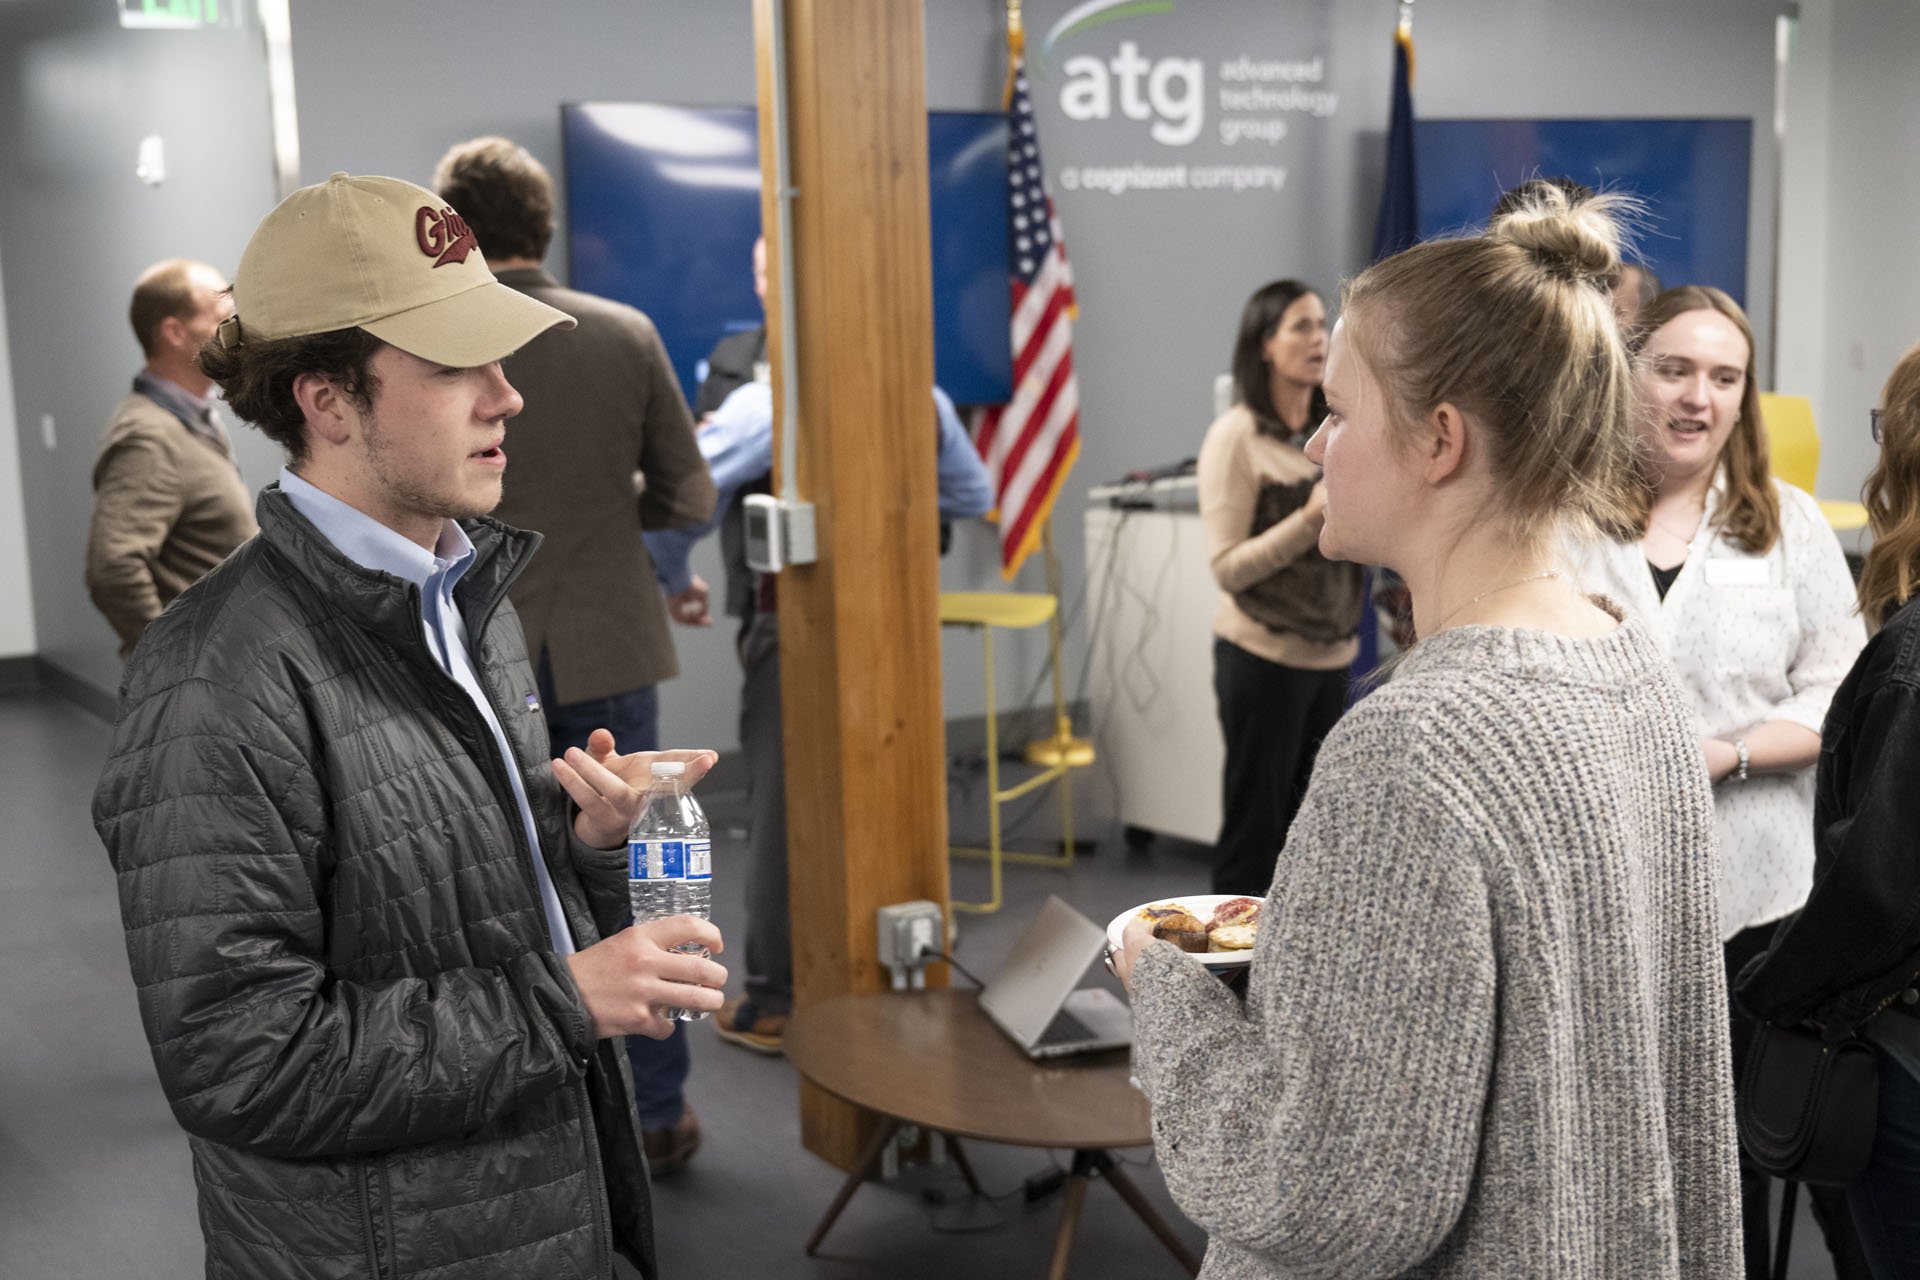  The Montana High tech Alliance meeting at Cognizant/ATG in Missoula, Mon., on Nov. 14, 2022.  